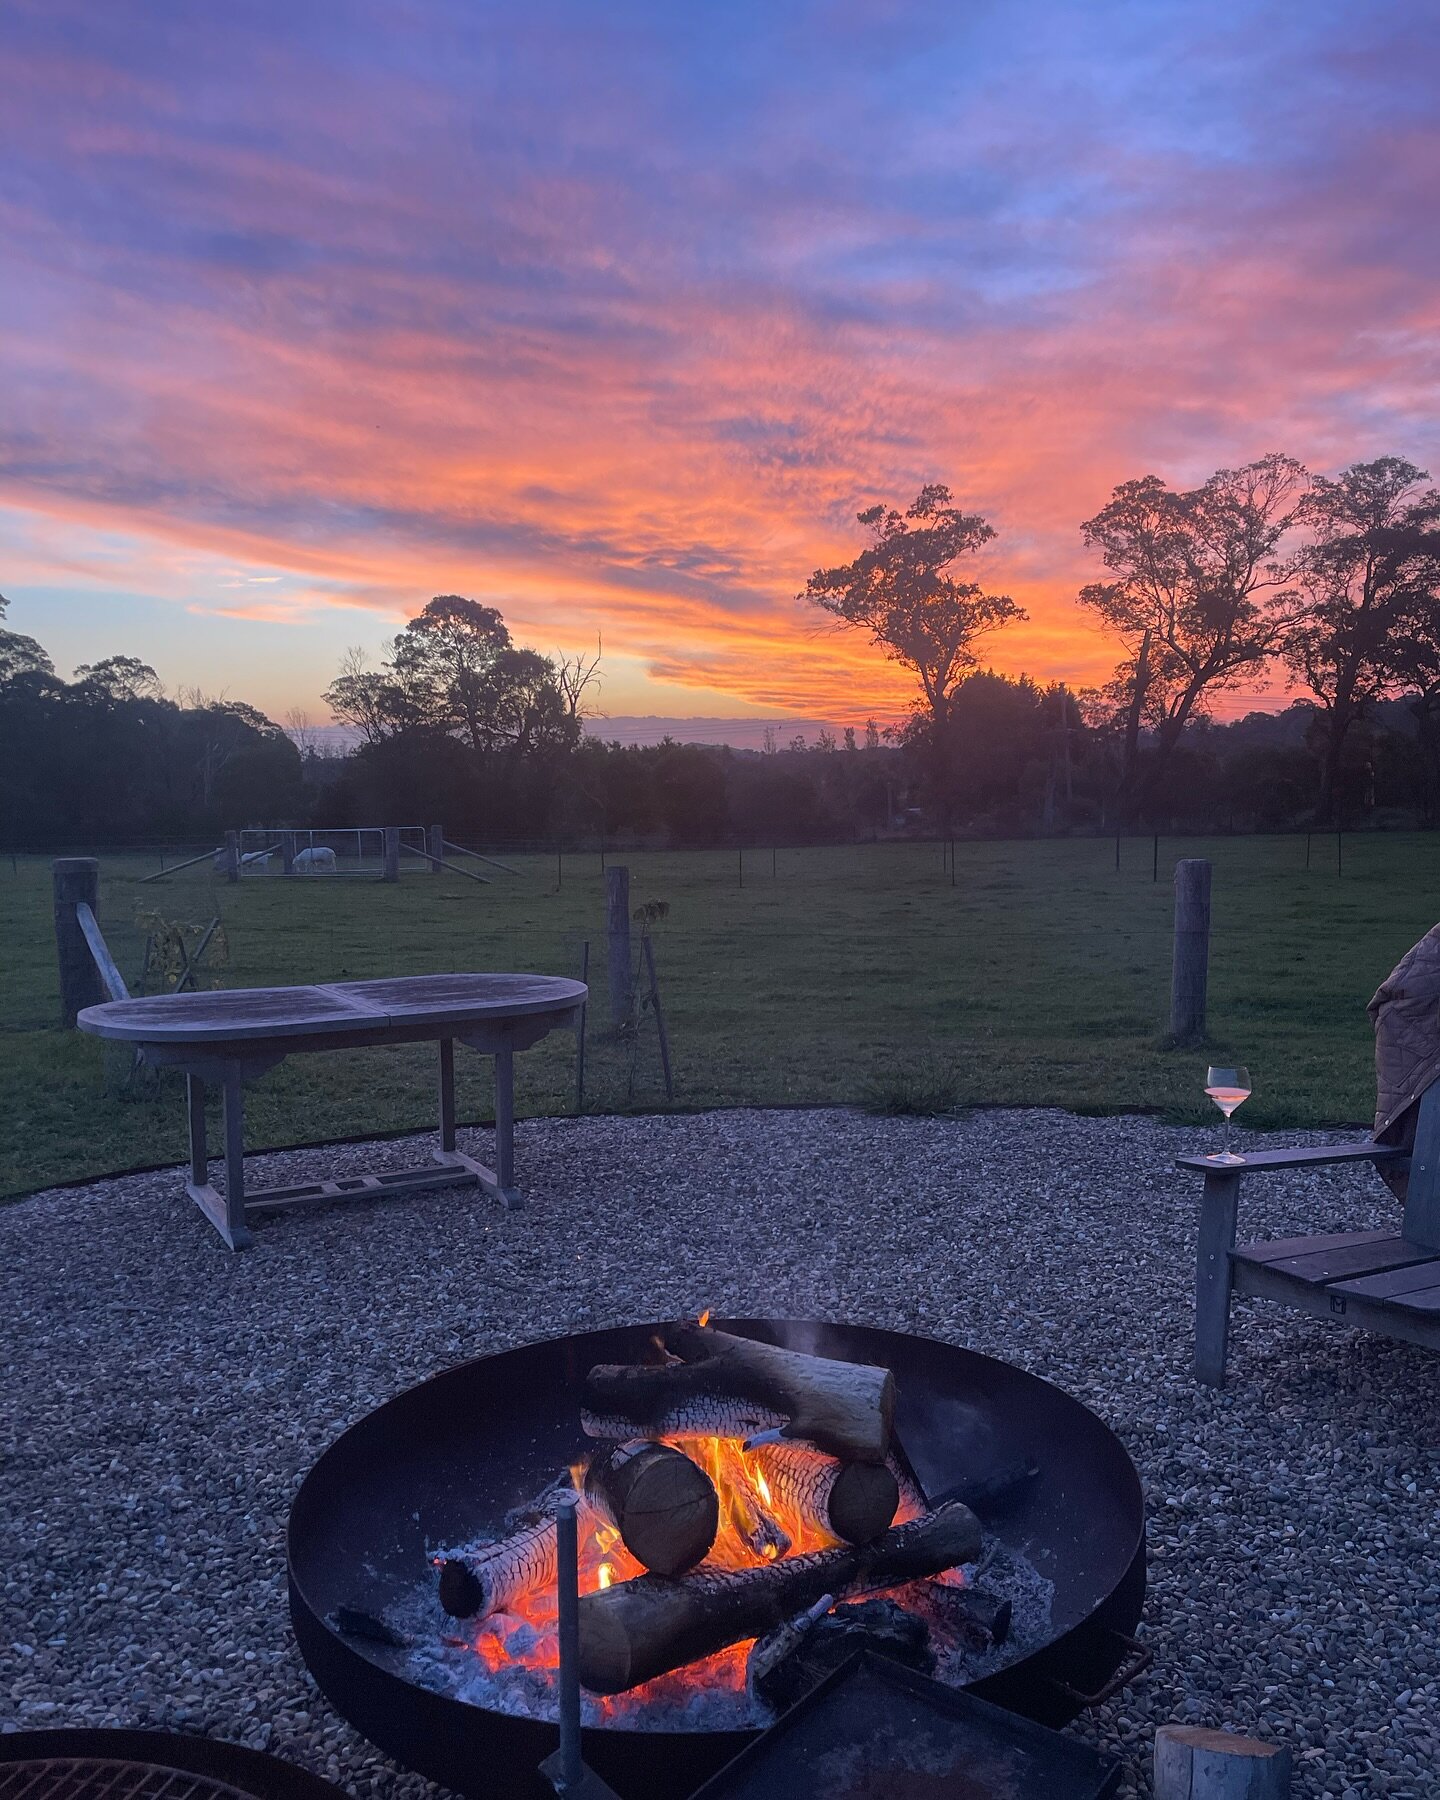 It doesn&rsquo;t get much better in my books. 

A successful day at work. Home to my family. 

Autumn evenings, fire pits, Easter Bunnies, sunsets like marshmallow rainbows, good friends, great food and a glass of wine. 

A very happy Emma Jane x